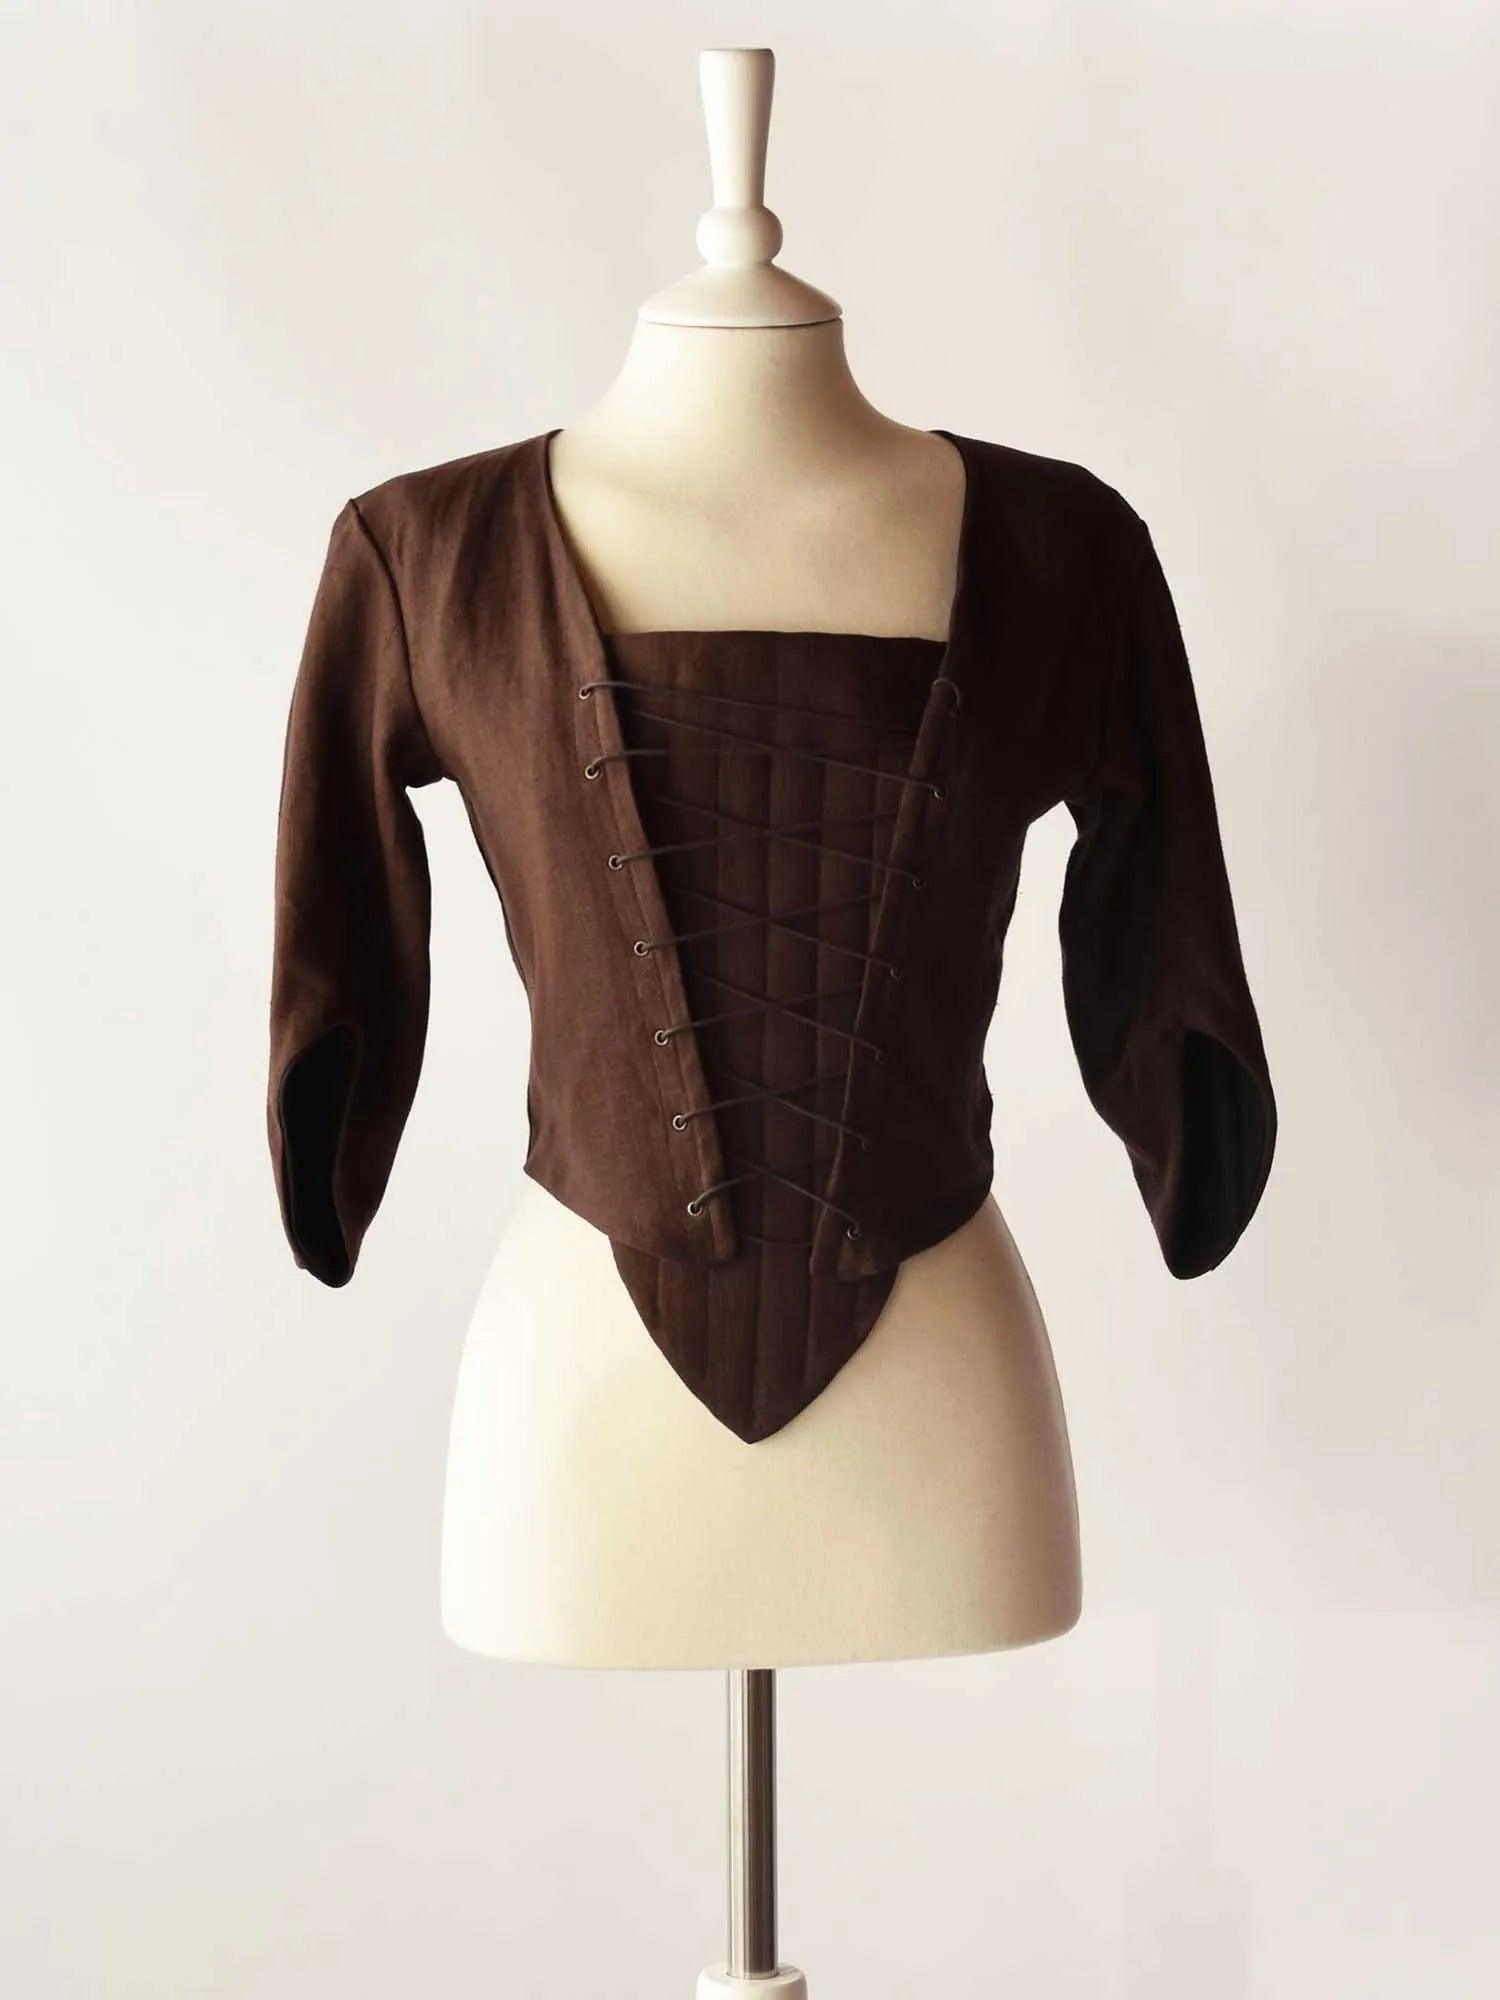 Lace-Up Bodice in Chocolate Linen - Atelier Serraspina